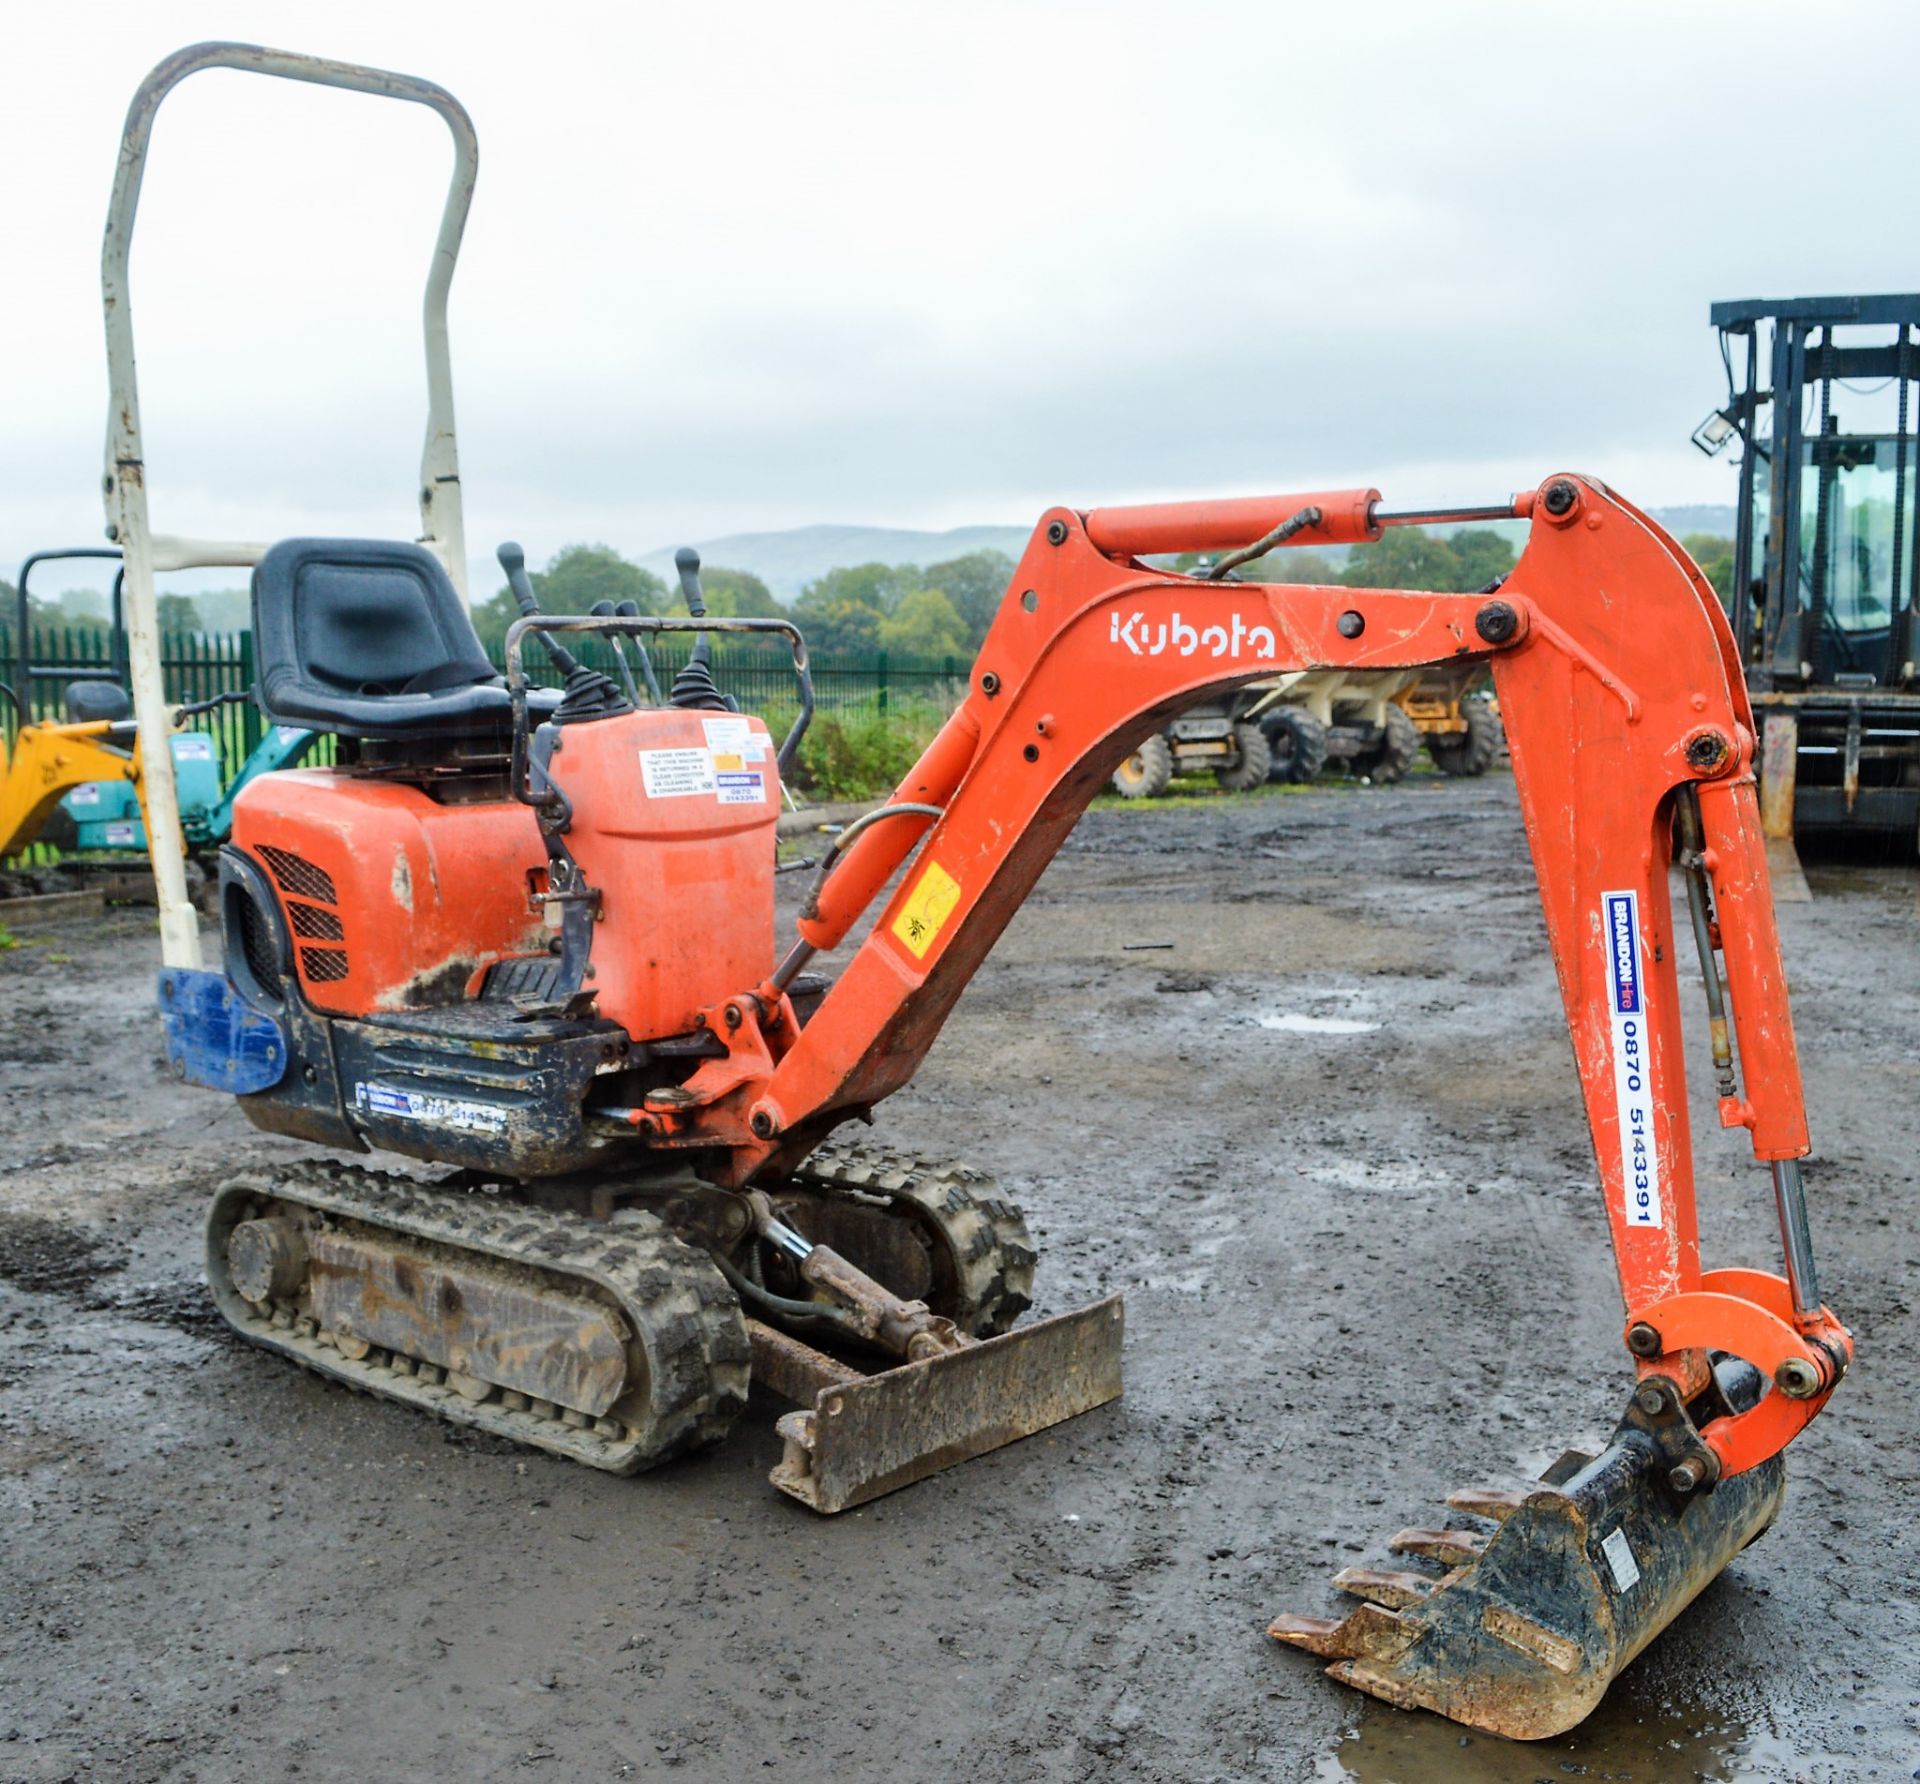 Kubota KX008-3 850 kg rubber tracked micro excavator Year: 2004 S/N: 12445 Recorded Hours: 4414 - Image 2 of 10